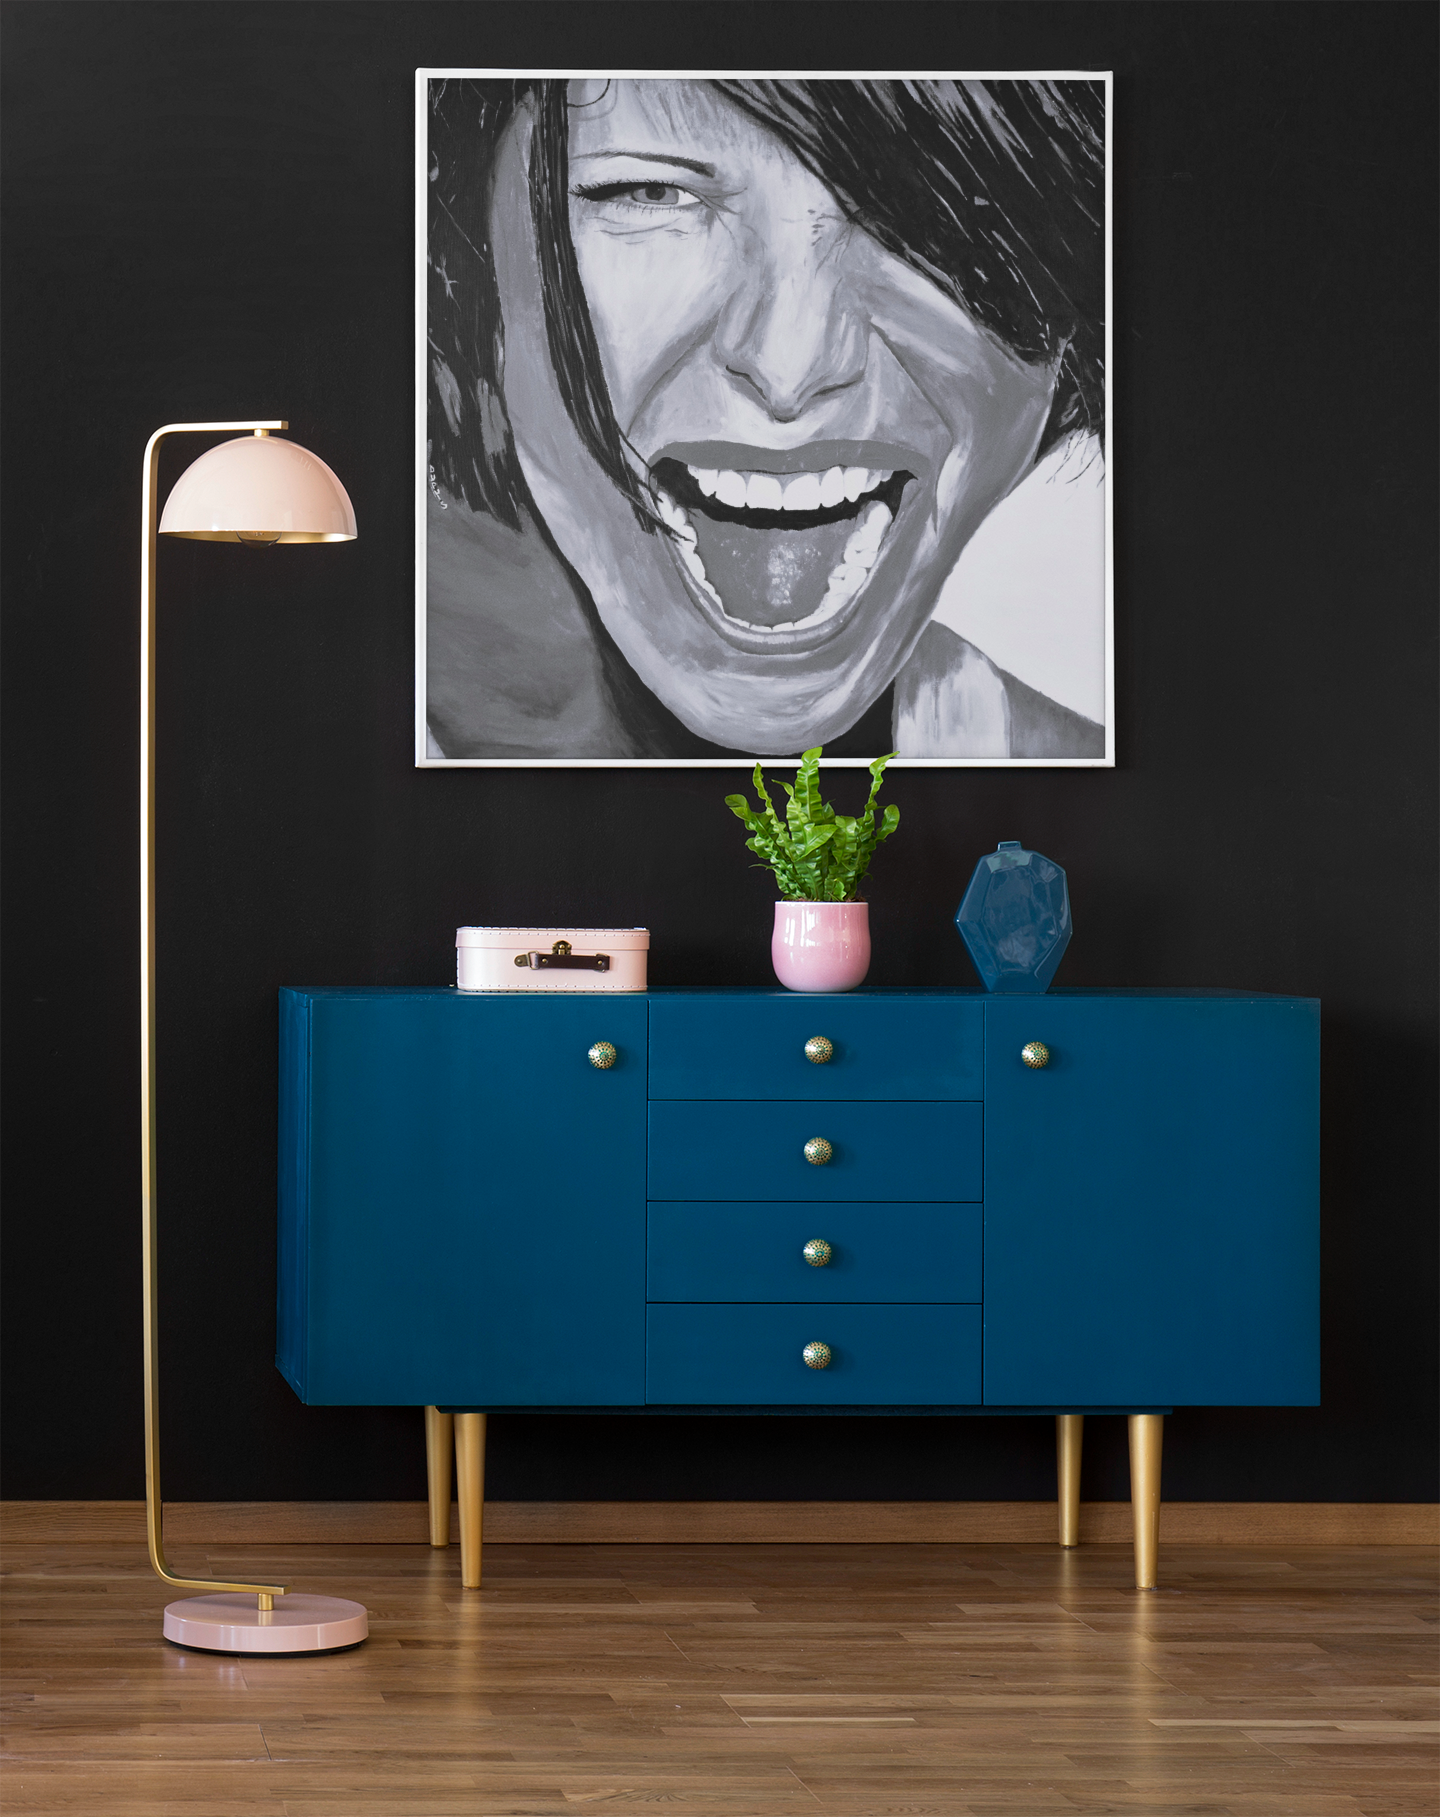 Black and White art print on canvas of a passionate woman showing emotion, hanging on a wall over a cabinet next to a lamp